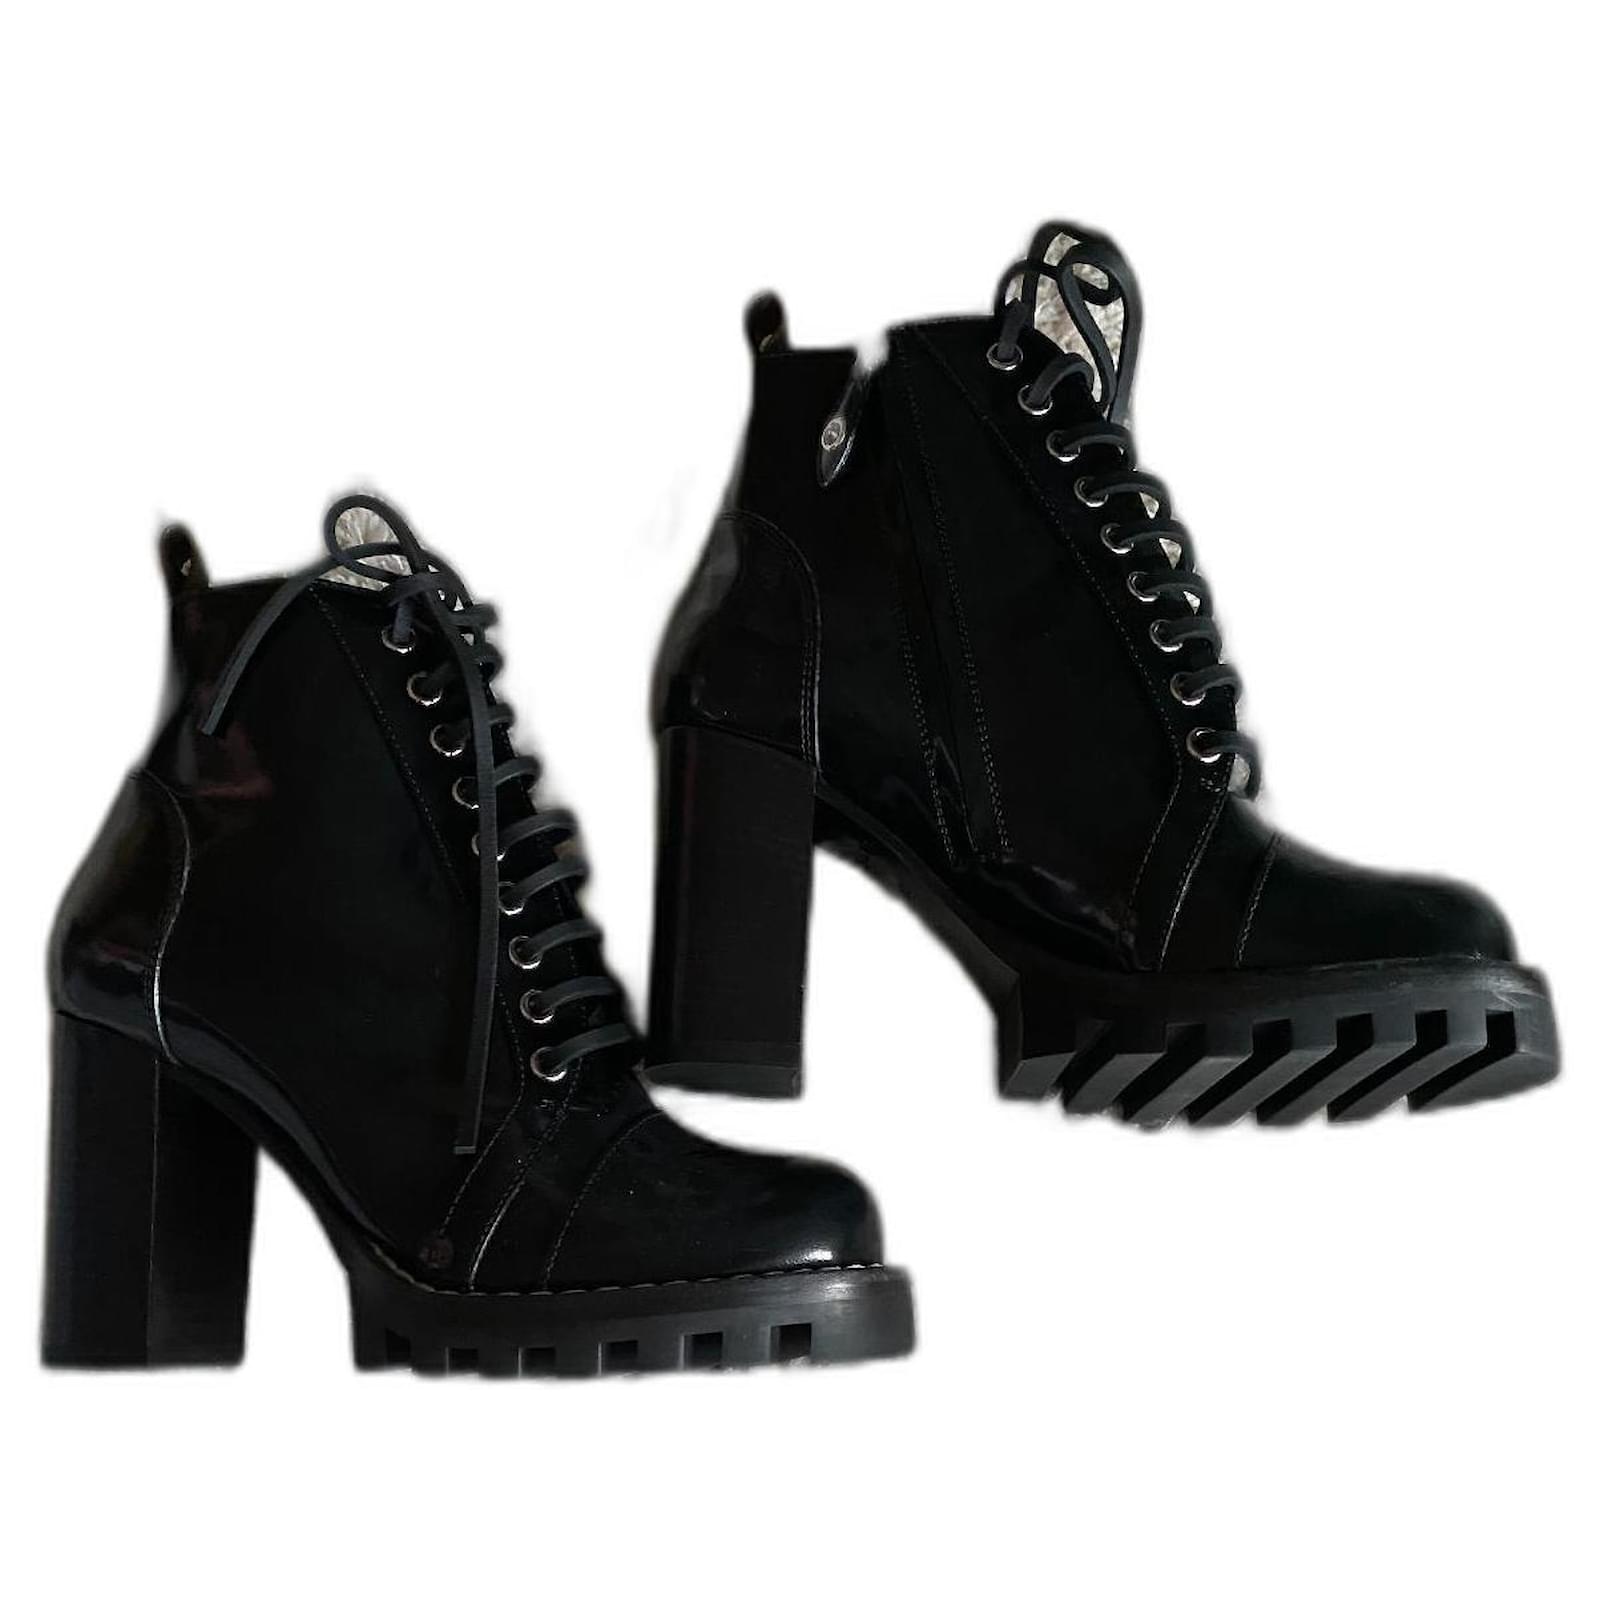 star trail ankle boot louis vuitton price